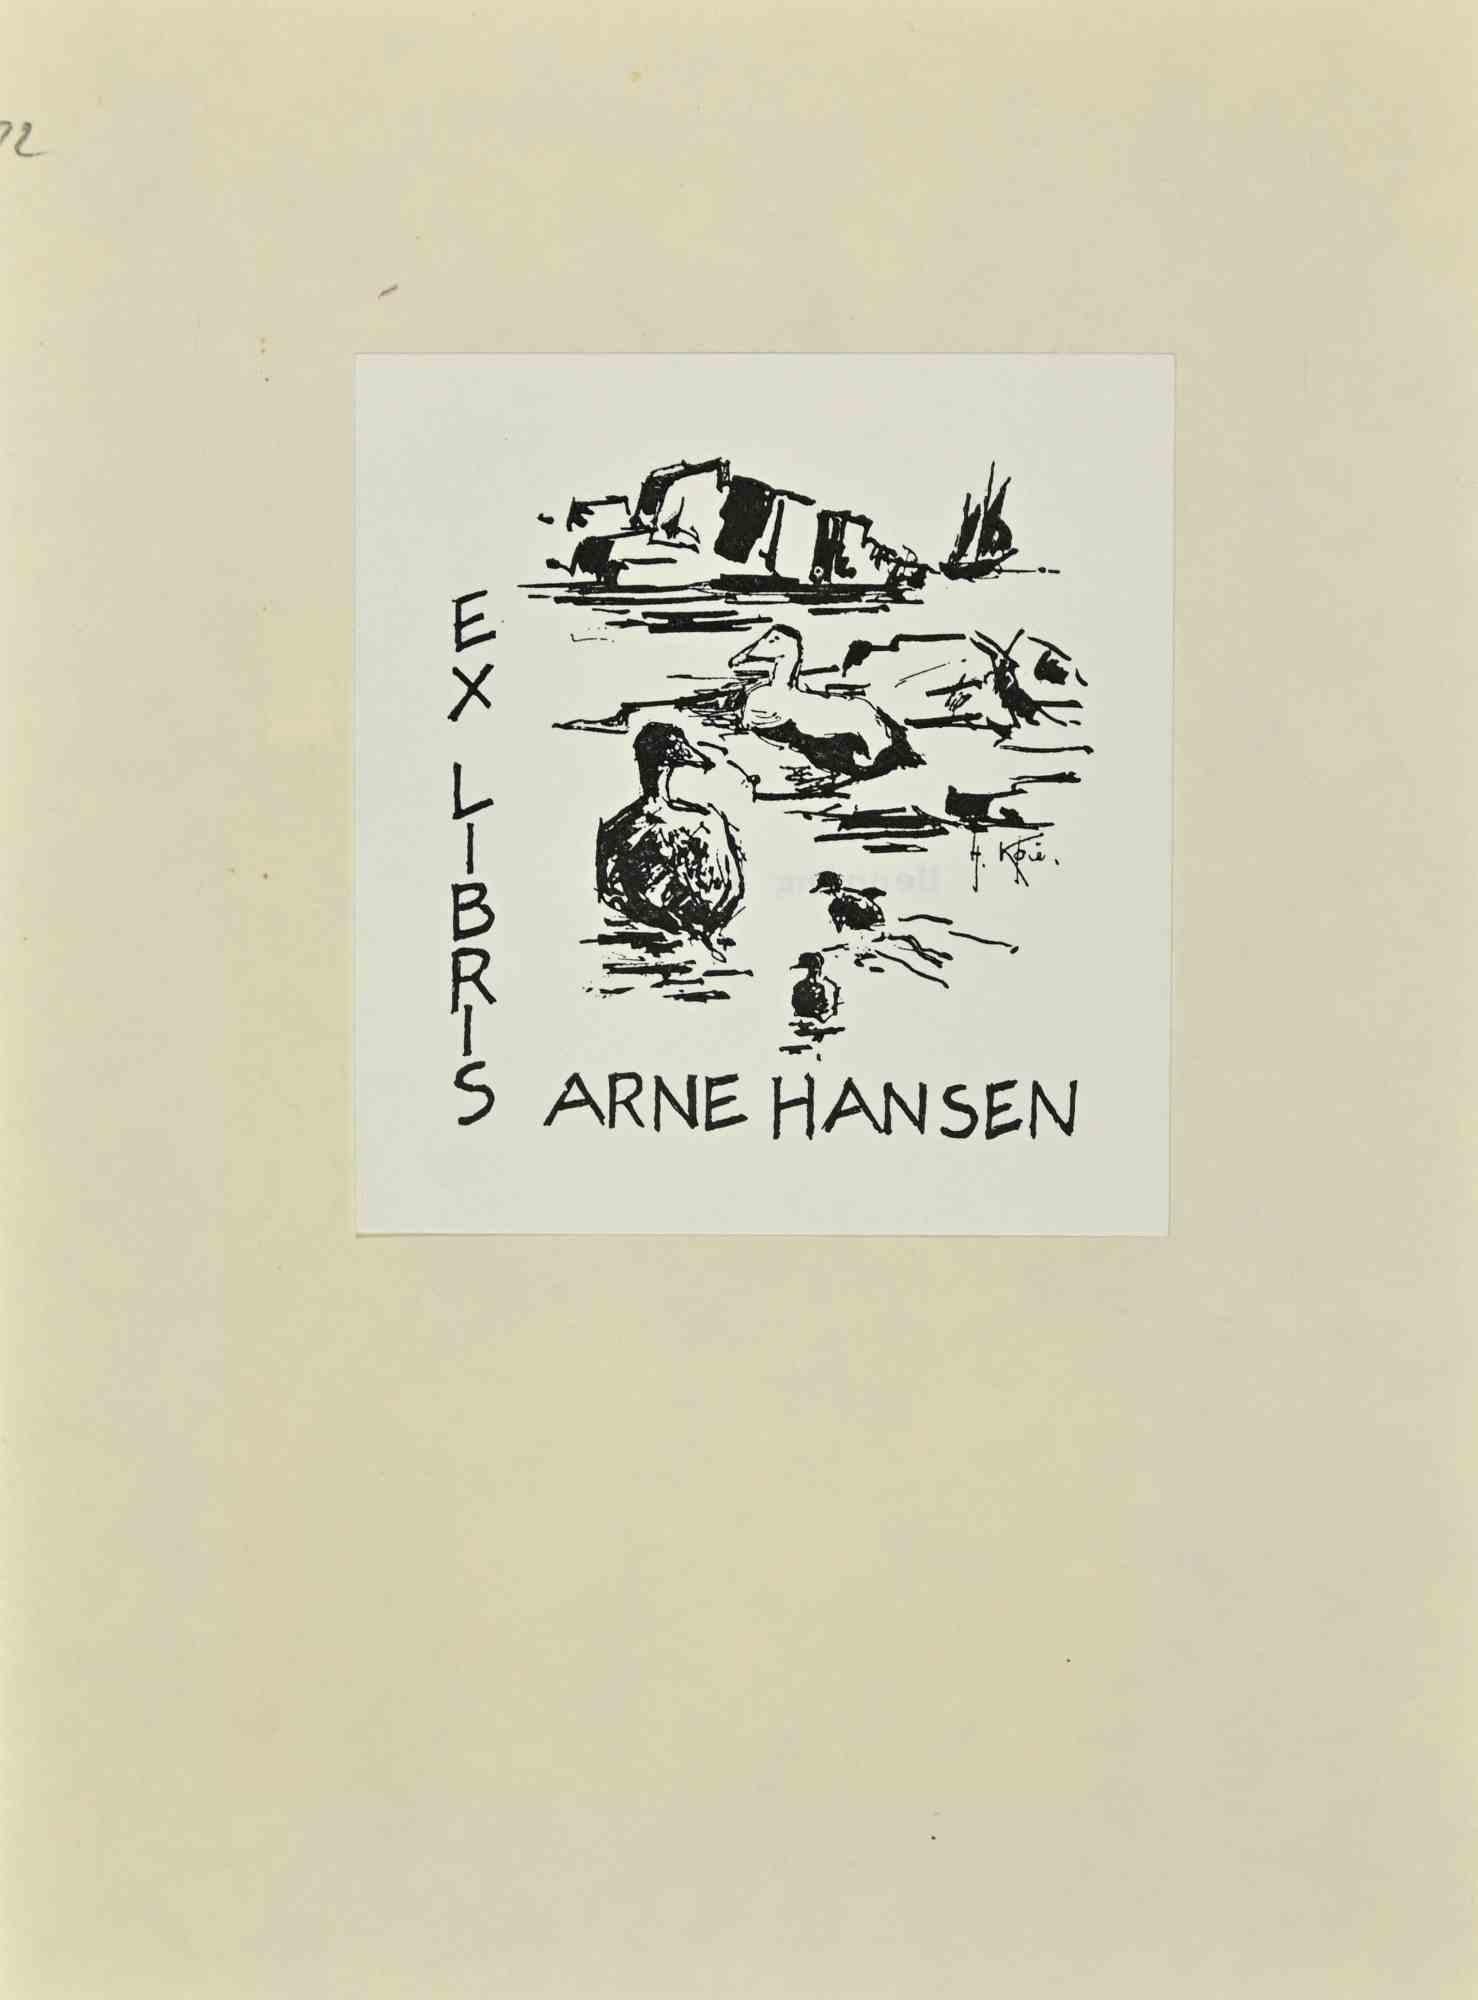 Ex Libris - Arne Hansen  is a Modern Artwork realized in Mid 20th Century, by Henning Koie .

Ex Libris. B/W woodcut on paper.  Signed on plate on the back.

The work is glued on ivory cardboard.

Total dimensions: 20x 15 cm.

Good conditions.

The